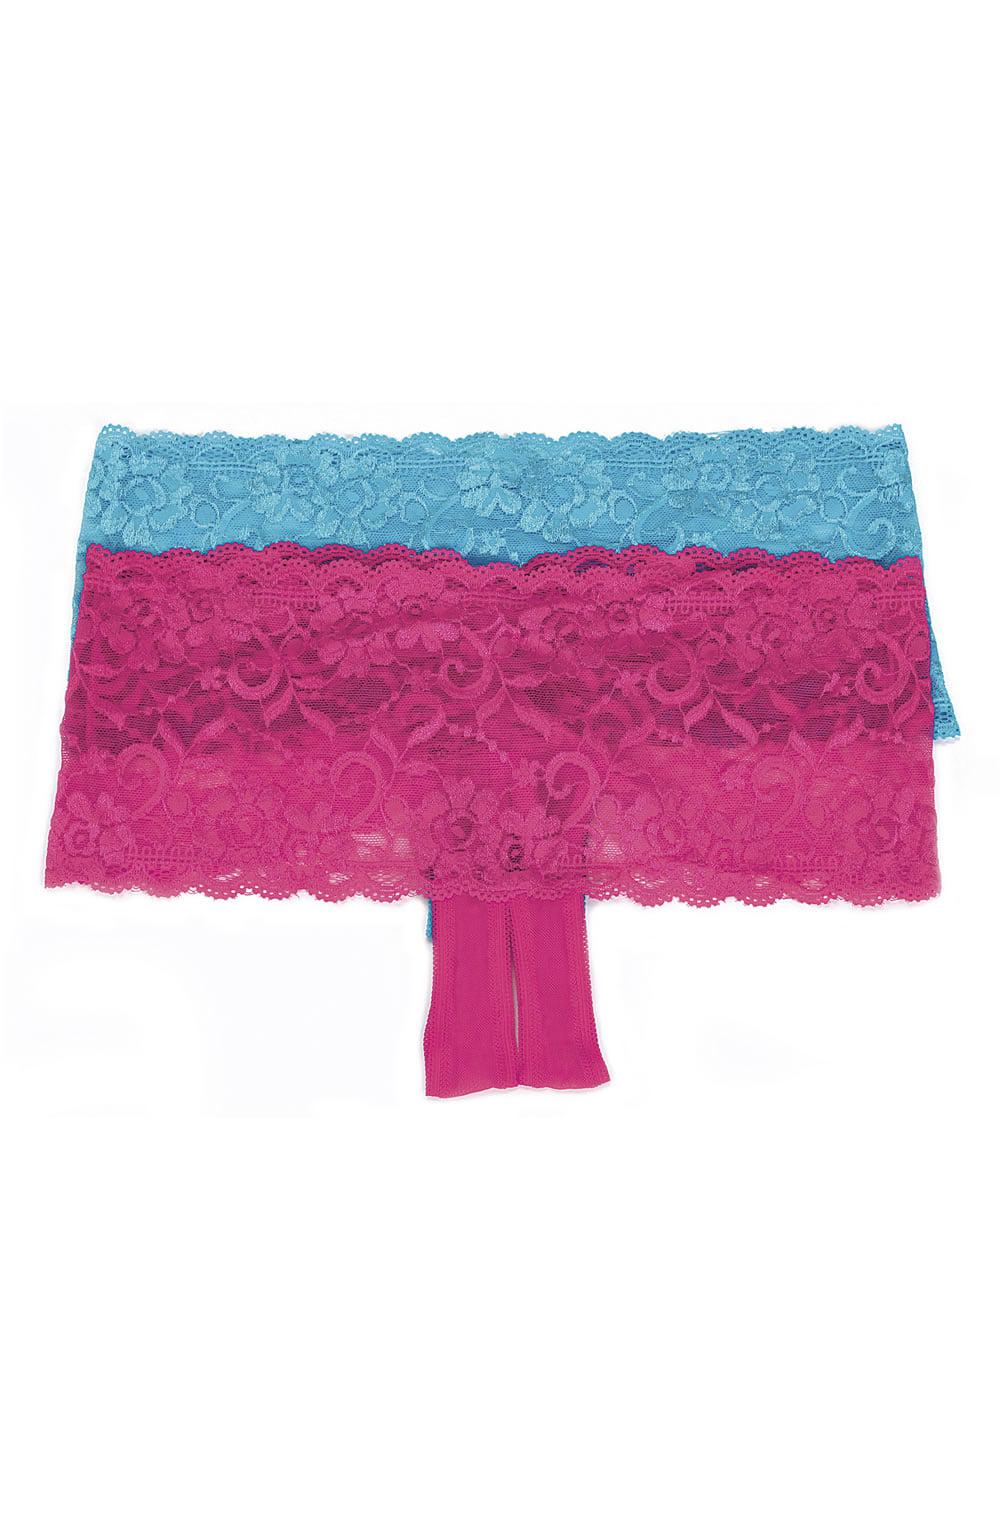 Shirley Of Hollywood 59 Stretch Lace Boy Short Turquoise-Katys Boutique